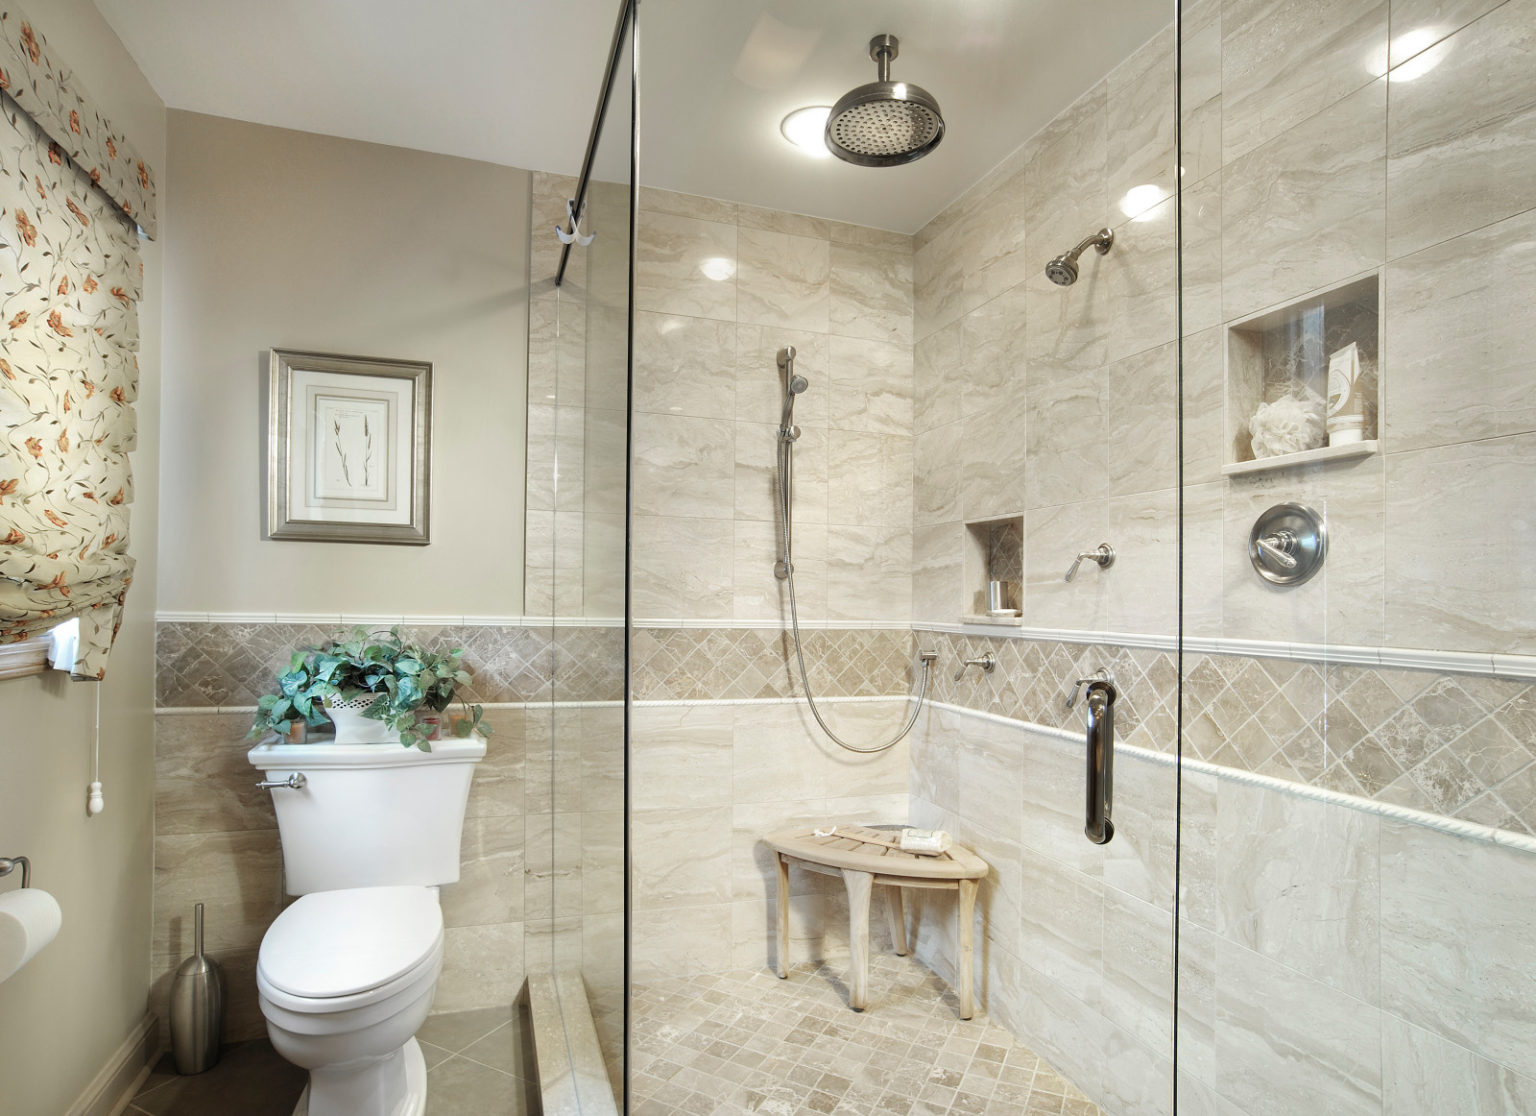 12 Most Incredible Master Bathroom Without Tub for a Small Space – AprylAnn